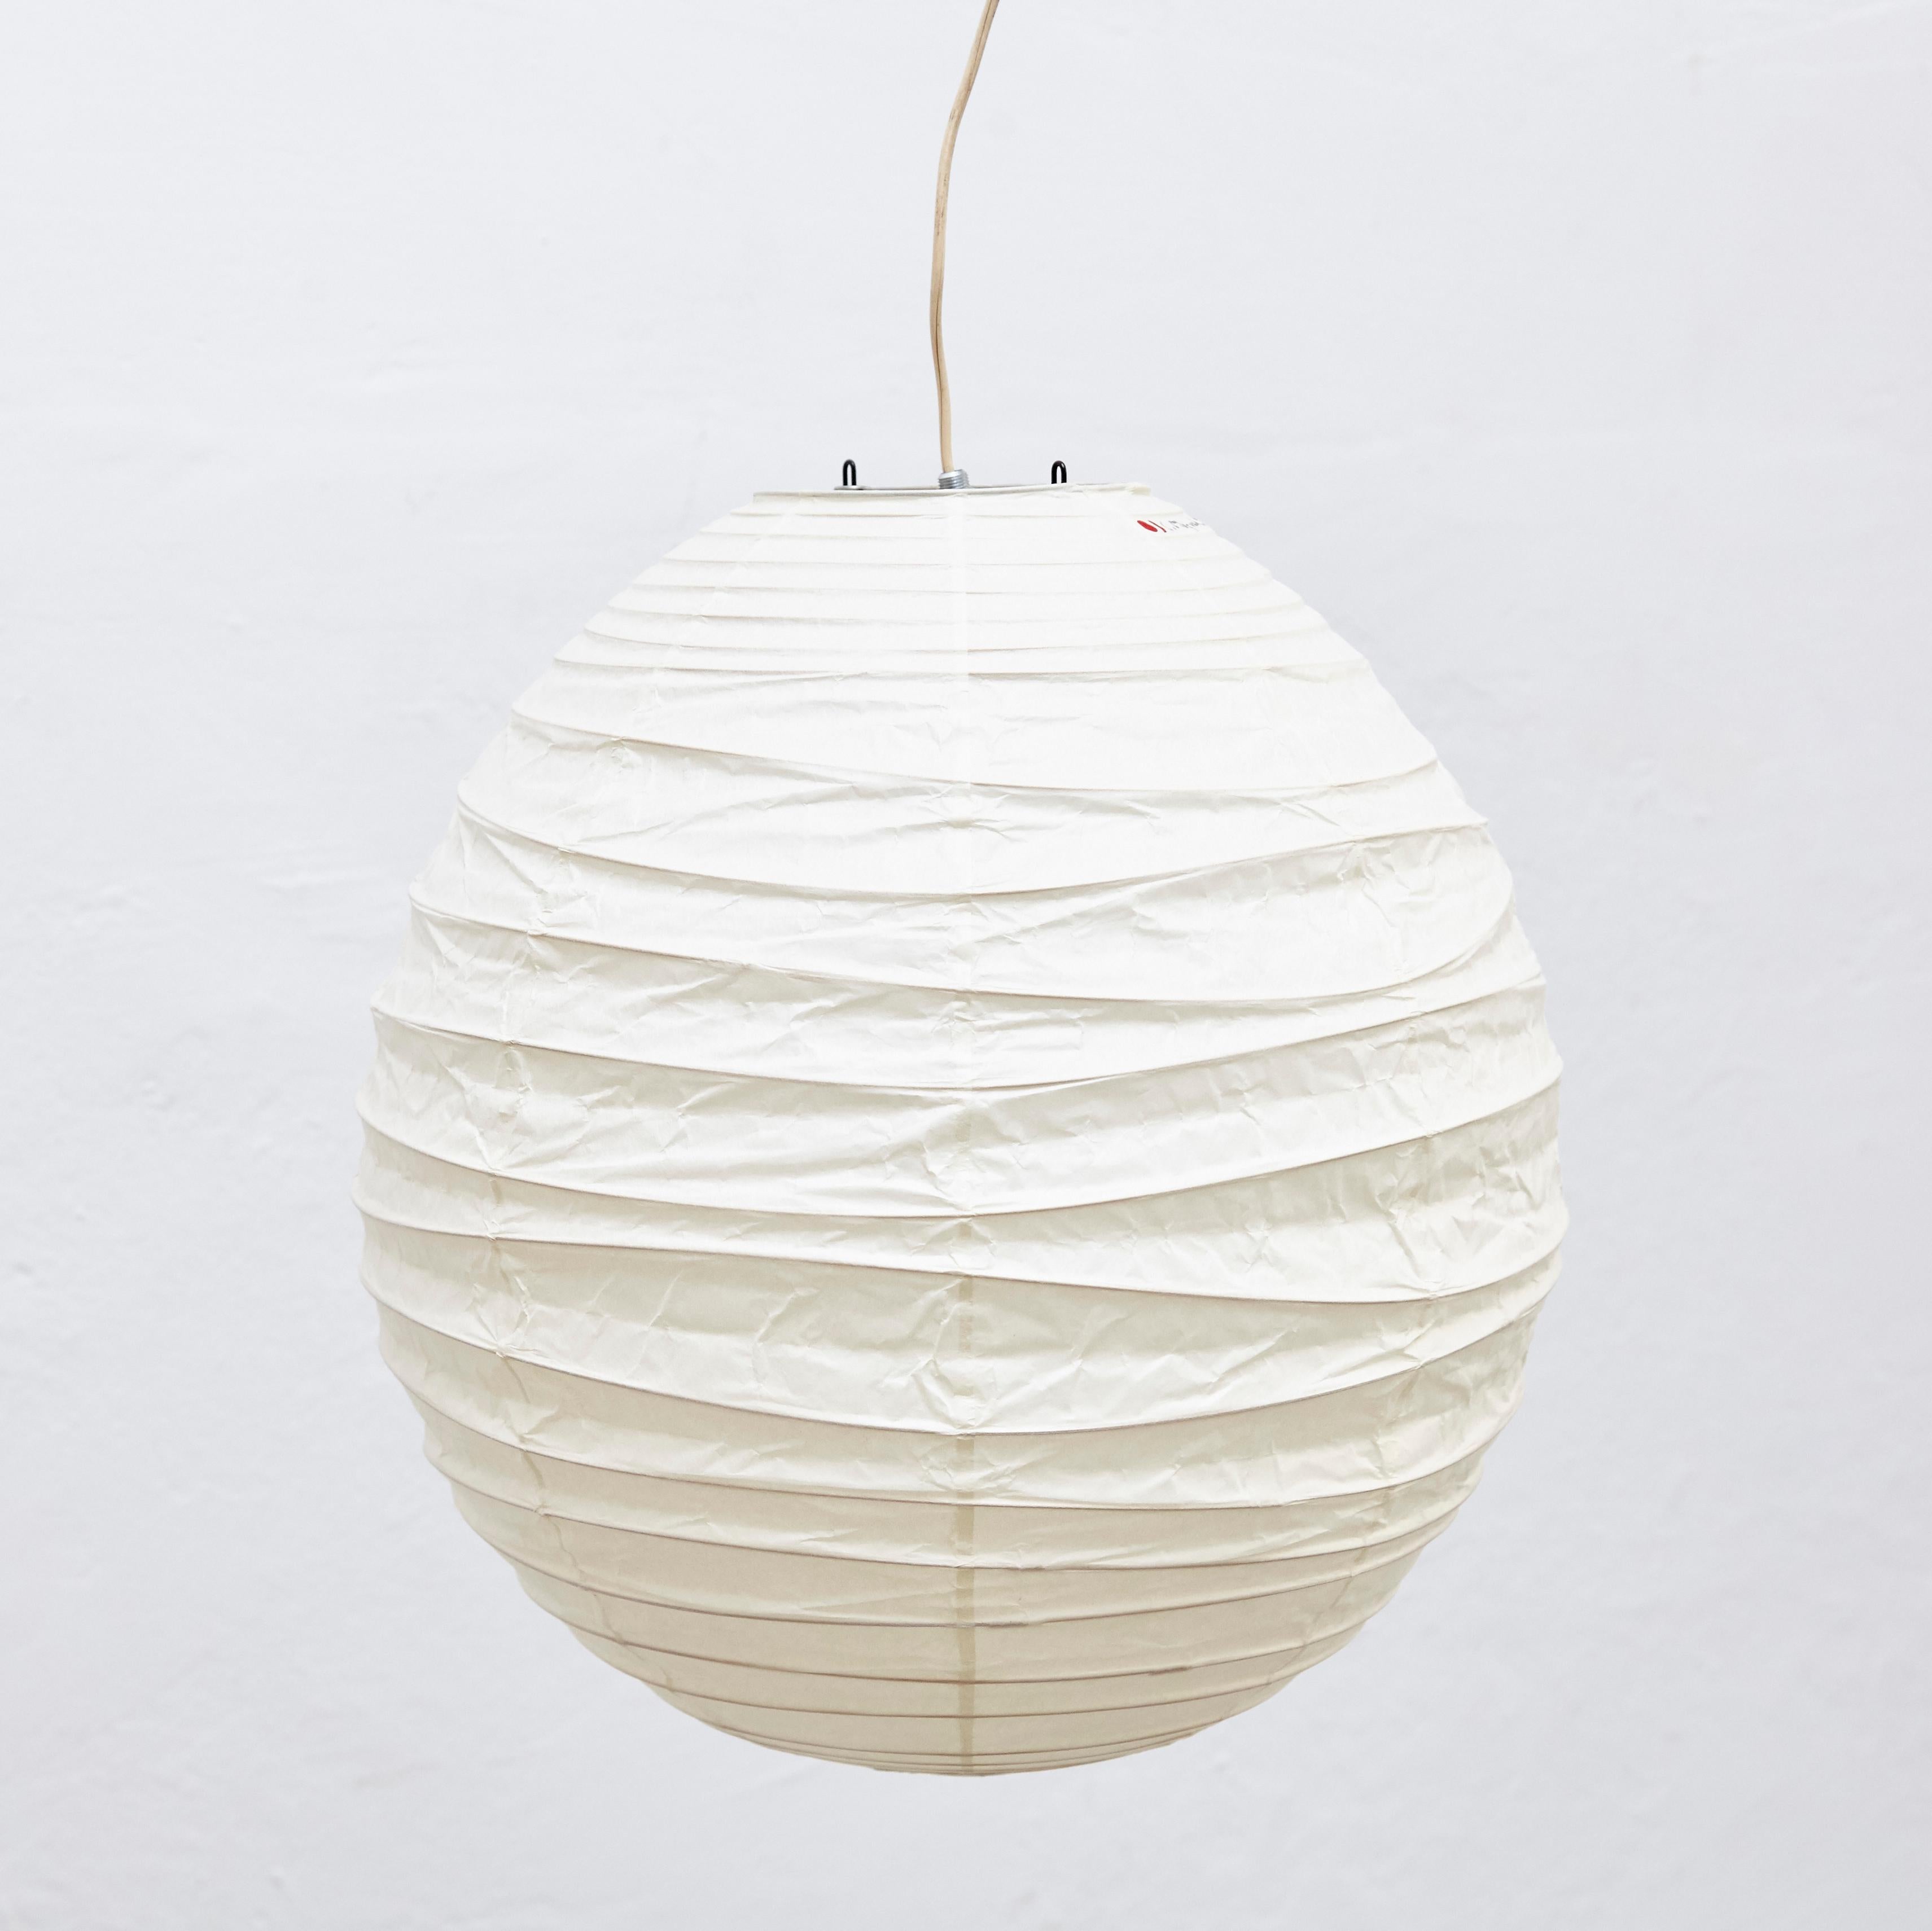 40DL ceiling lamp, designed by Isamu Noguchi.
Manufactured by Ozeki & Company Ltd. (Japan.)
Bamboo ribbing structure covered by washi paper manufactured according to the traditional procedures.

In good vintage condition.

Edition signed with